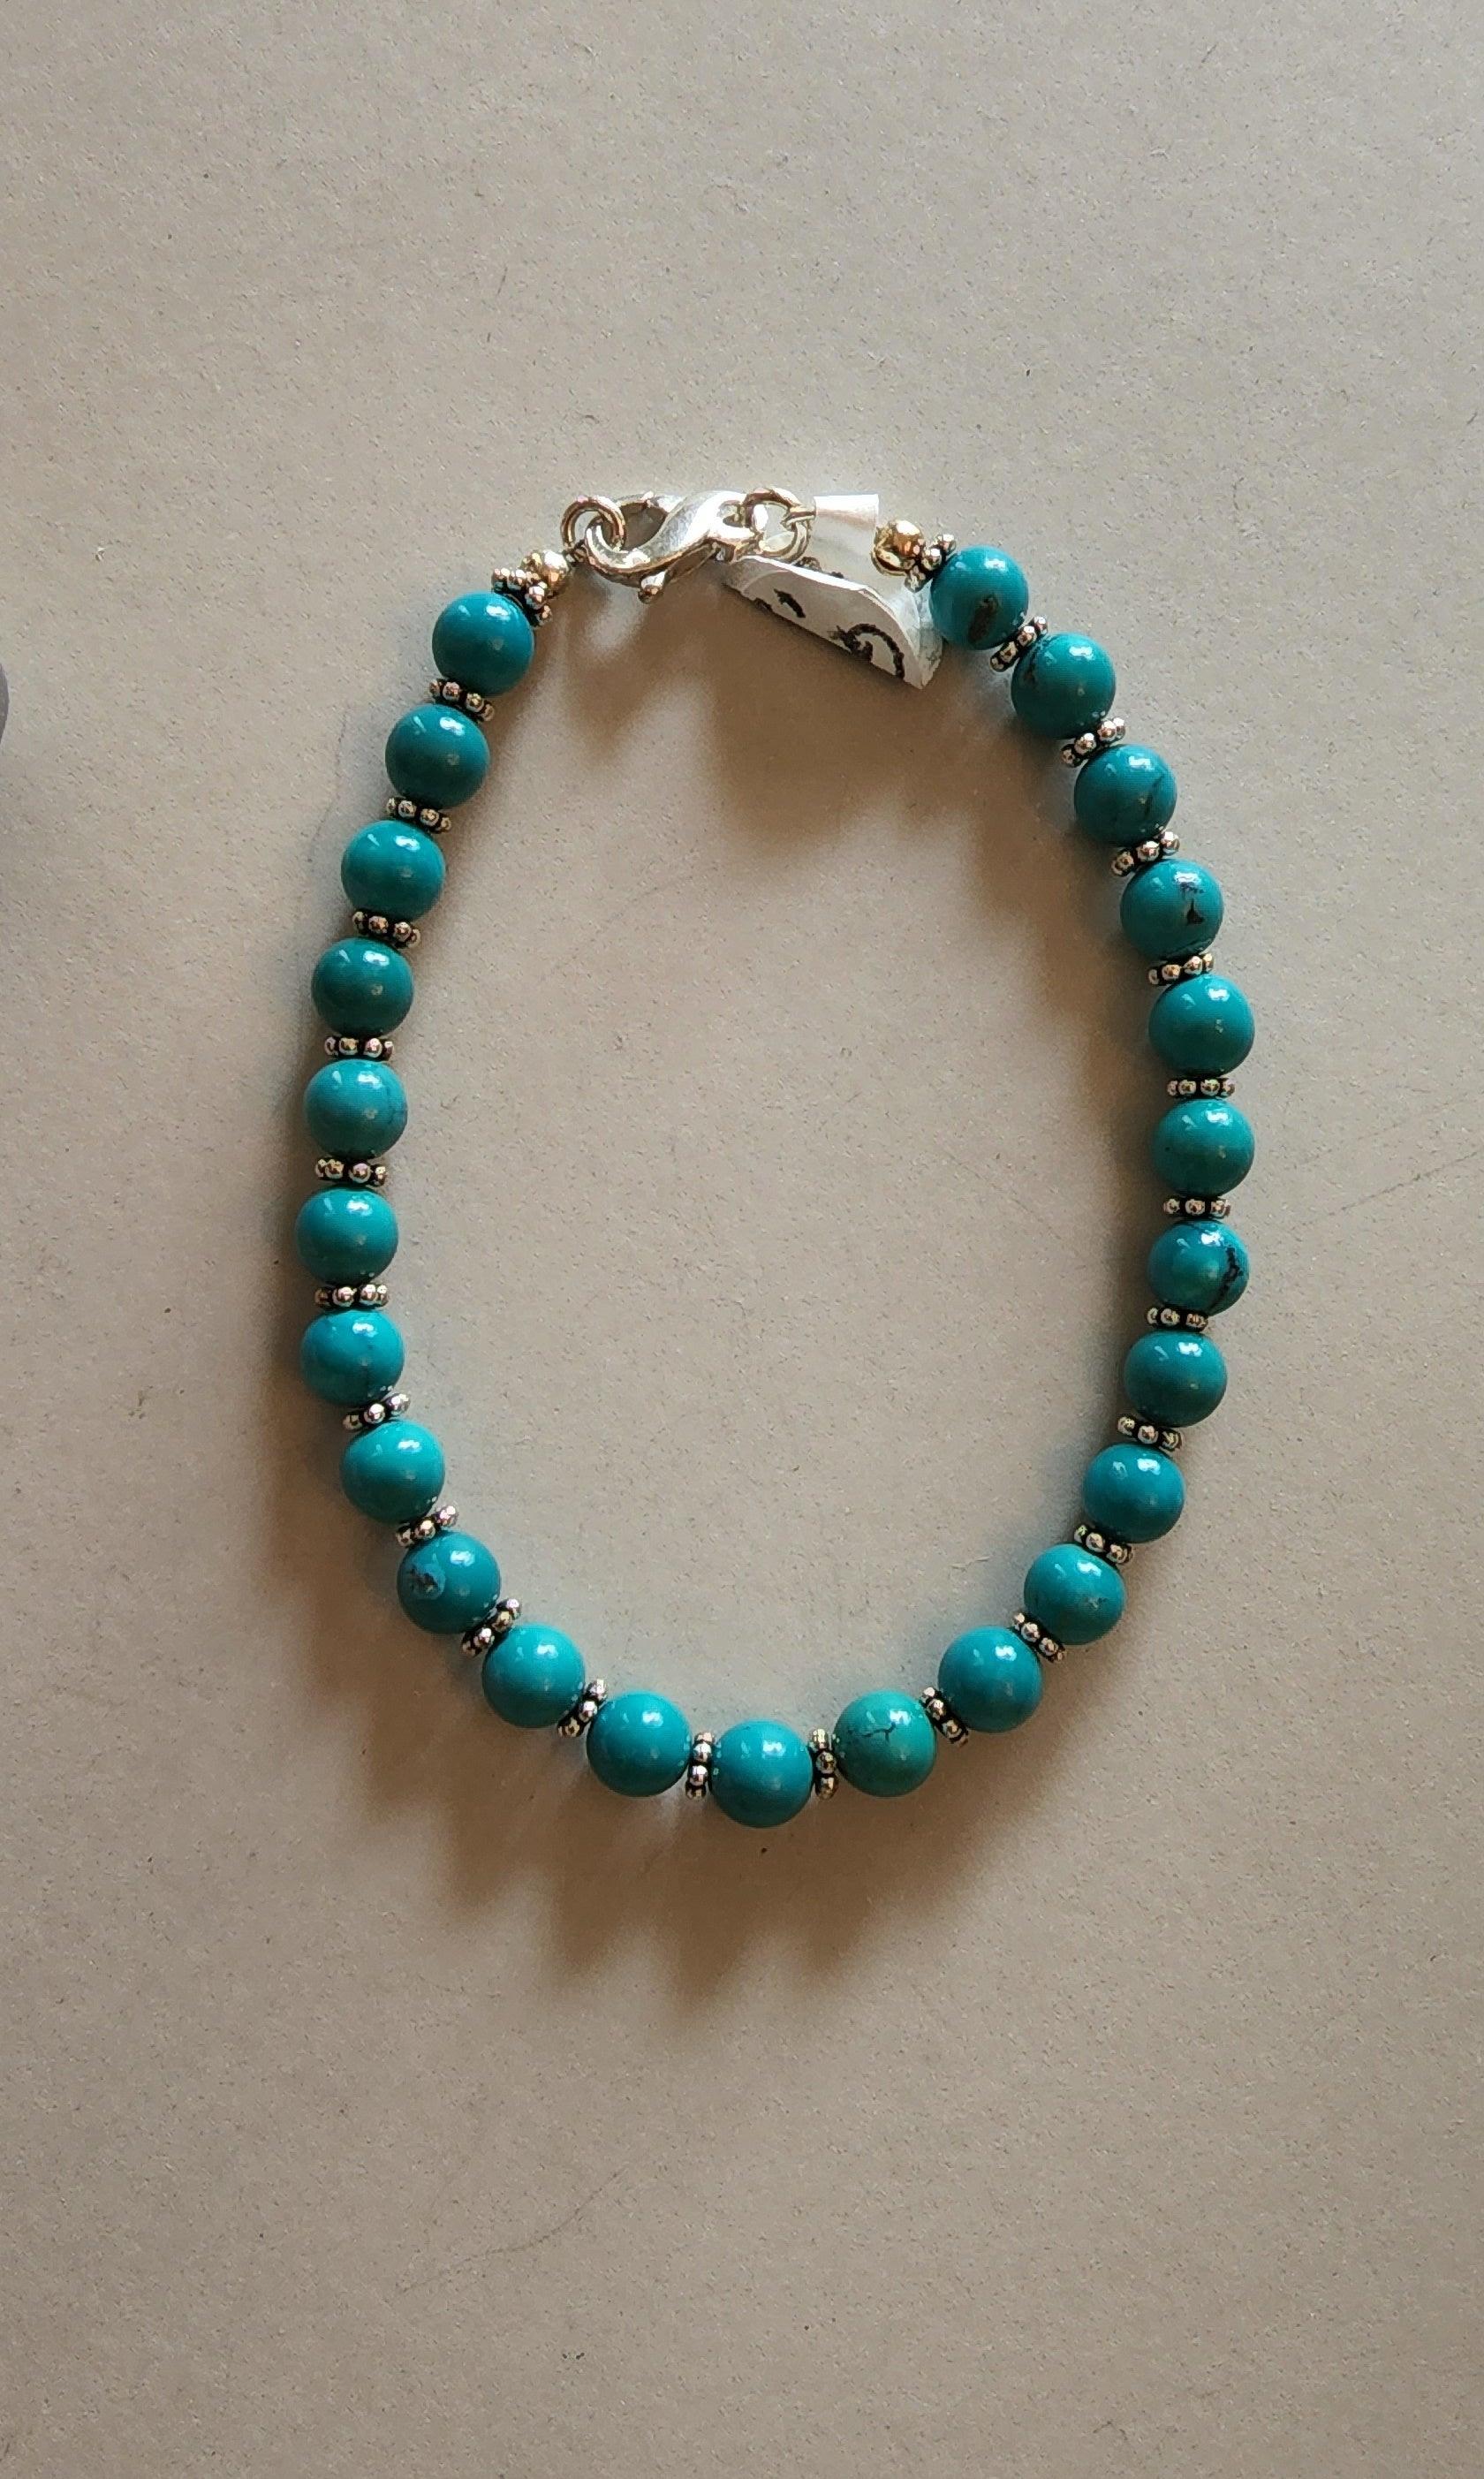 Handmade Womans Turquoise and Sterling Silver Beaded Bracelet - Gilded Heart Designs